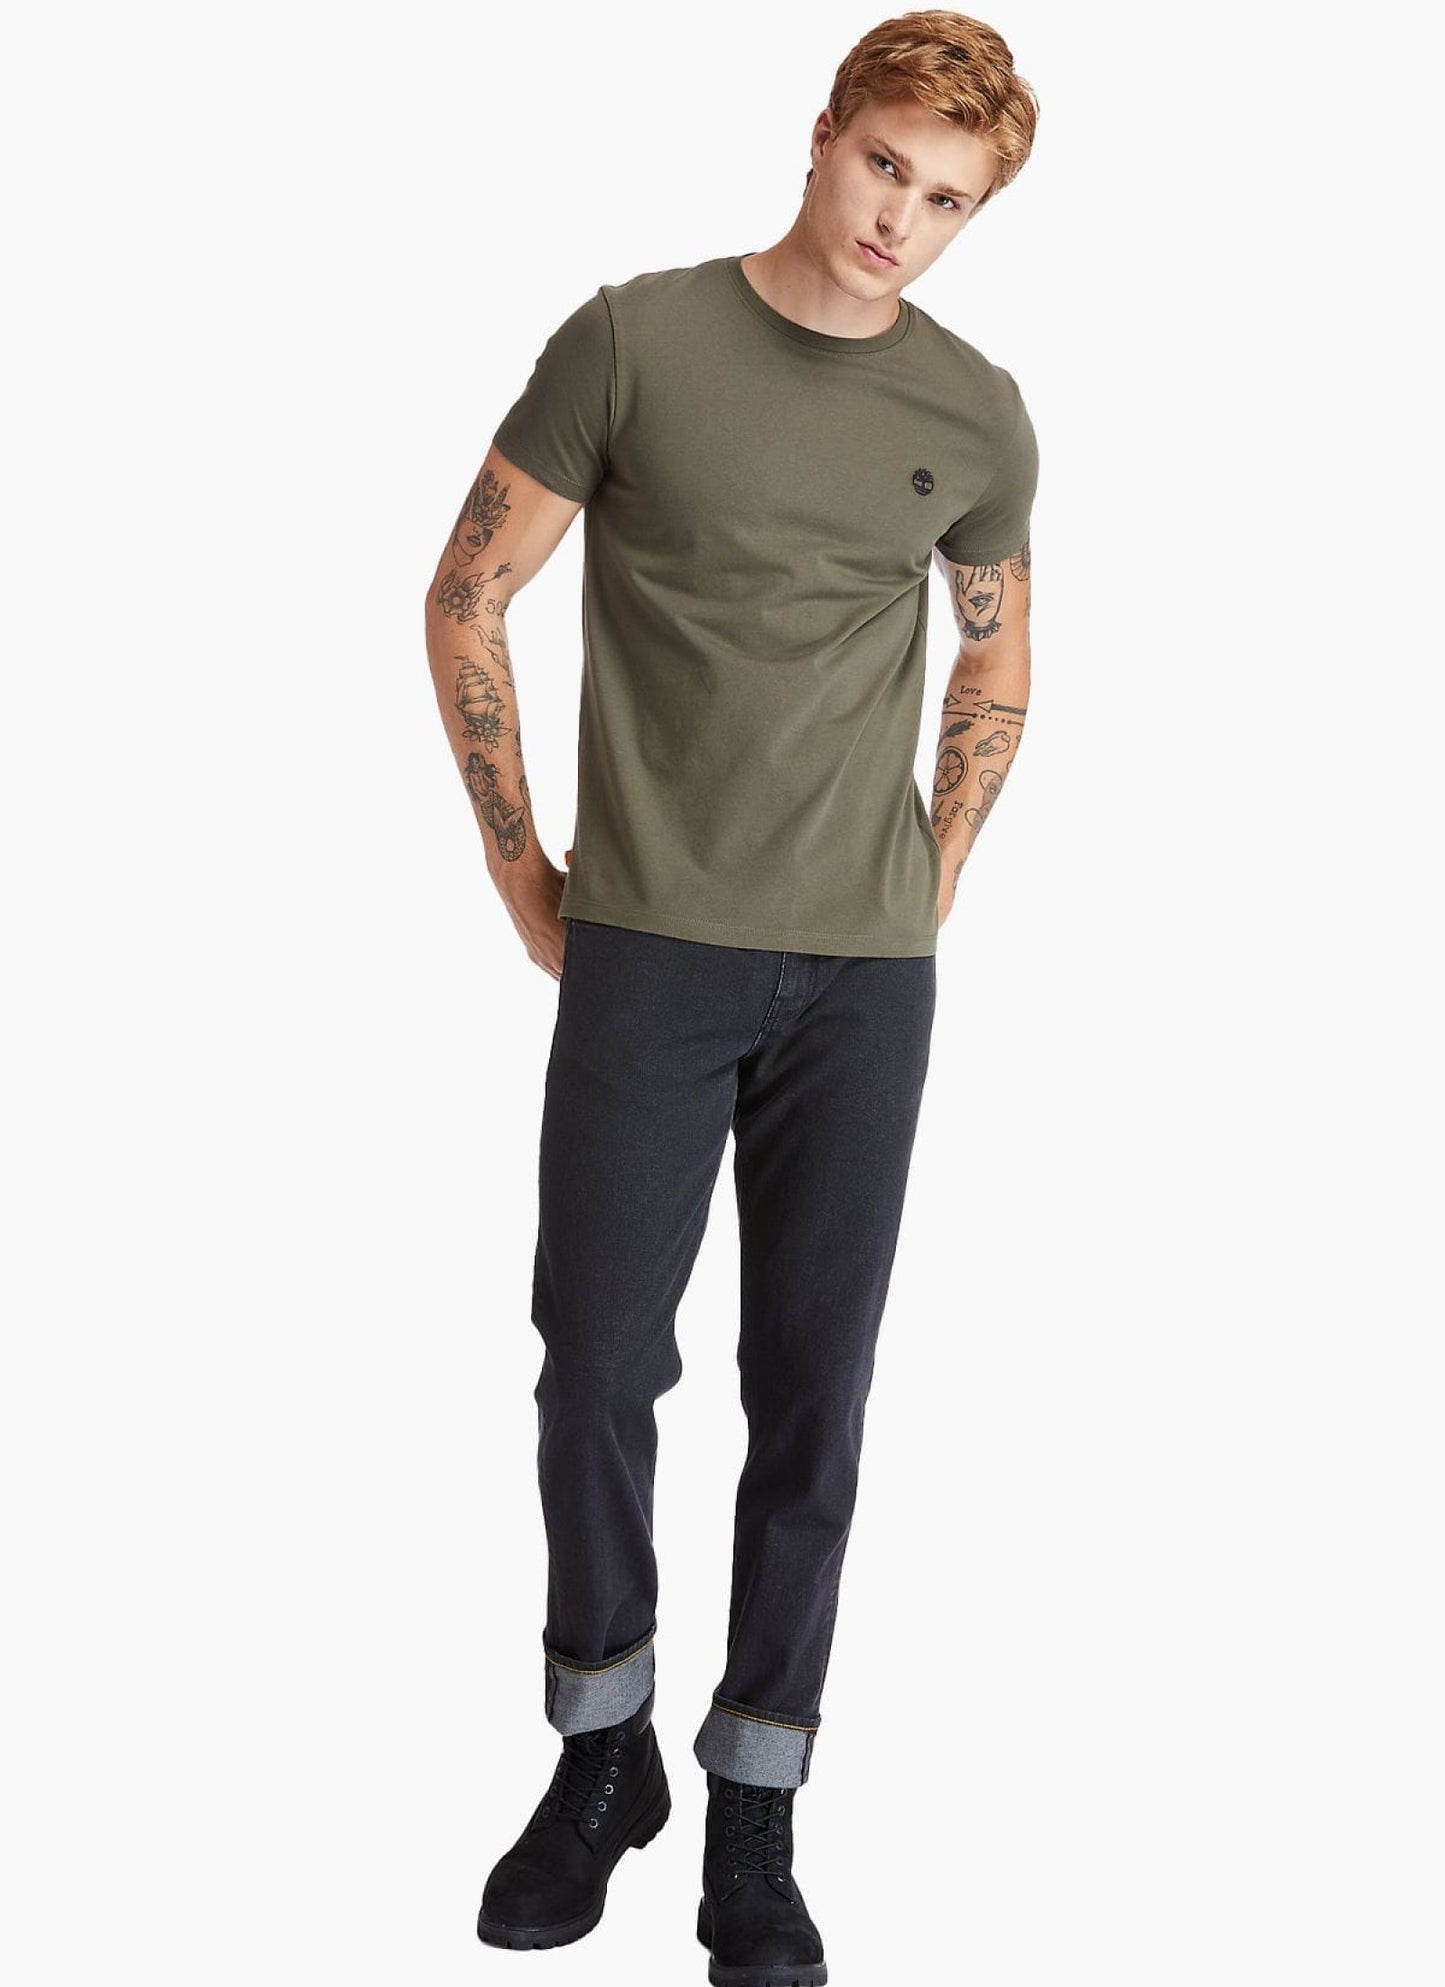 Timberland Slim Fit Olive Green T-Shirt